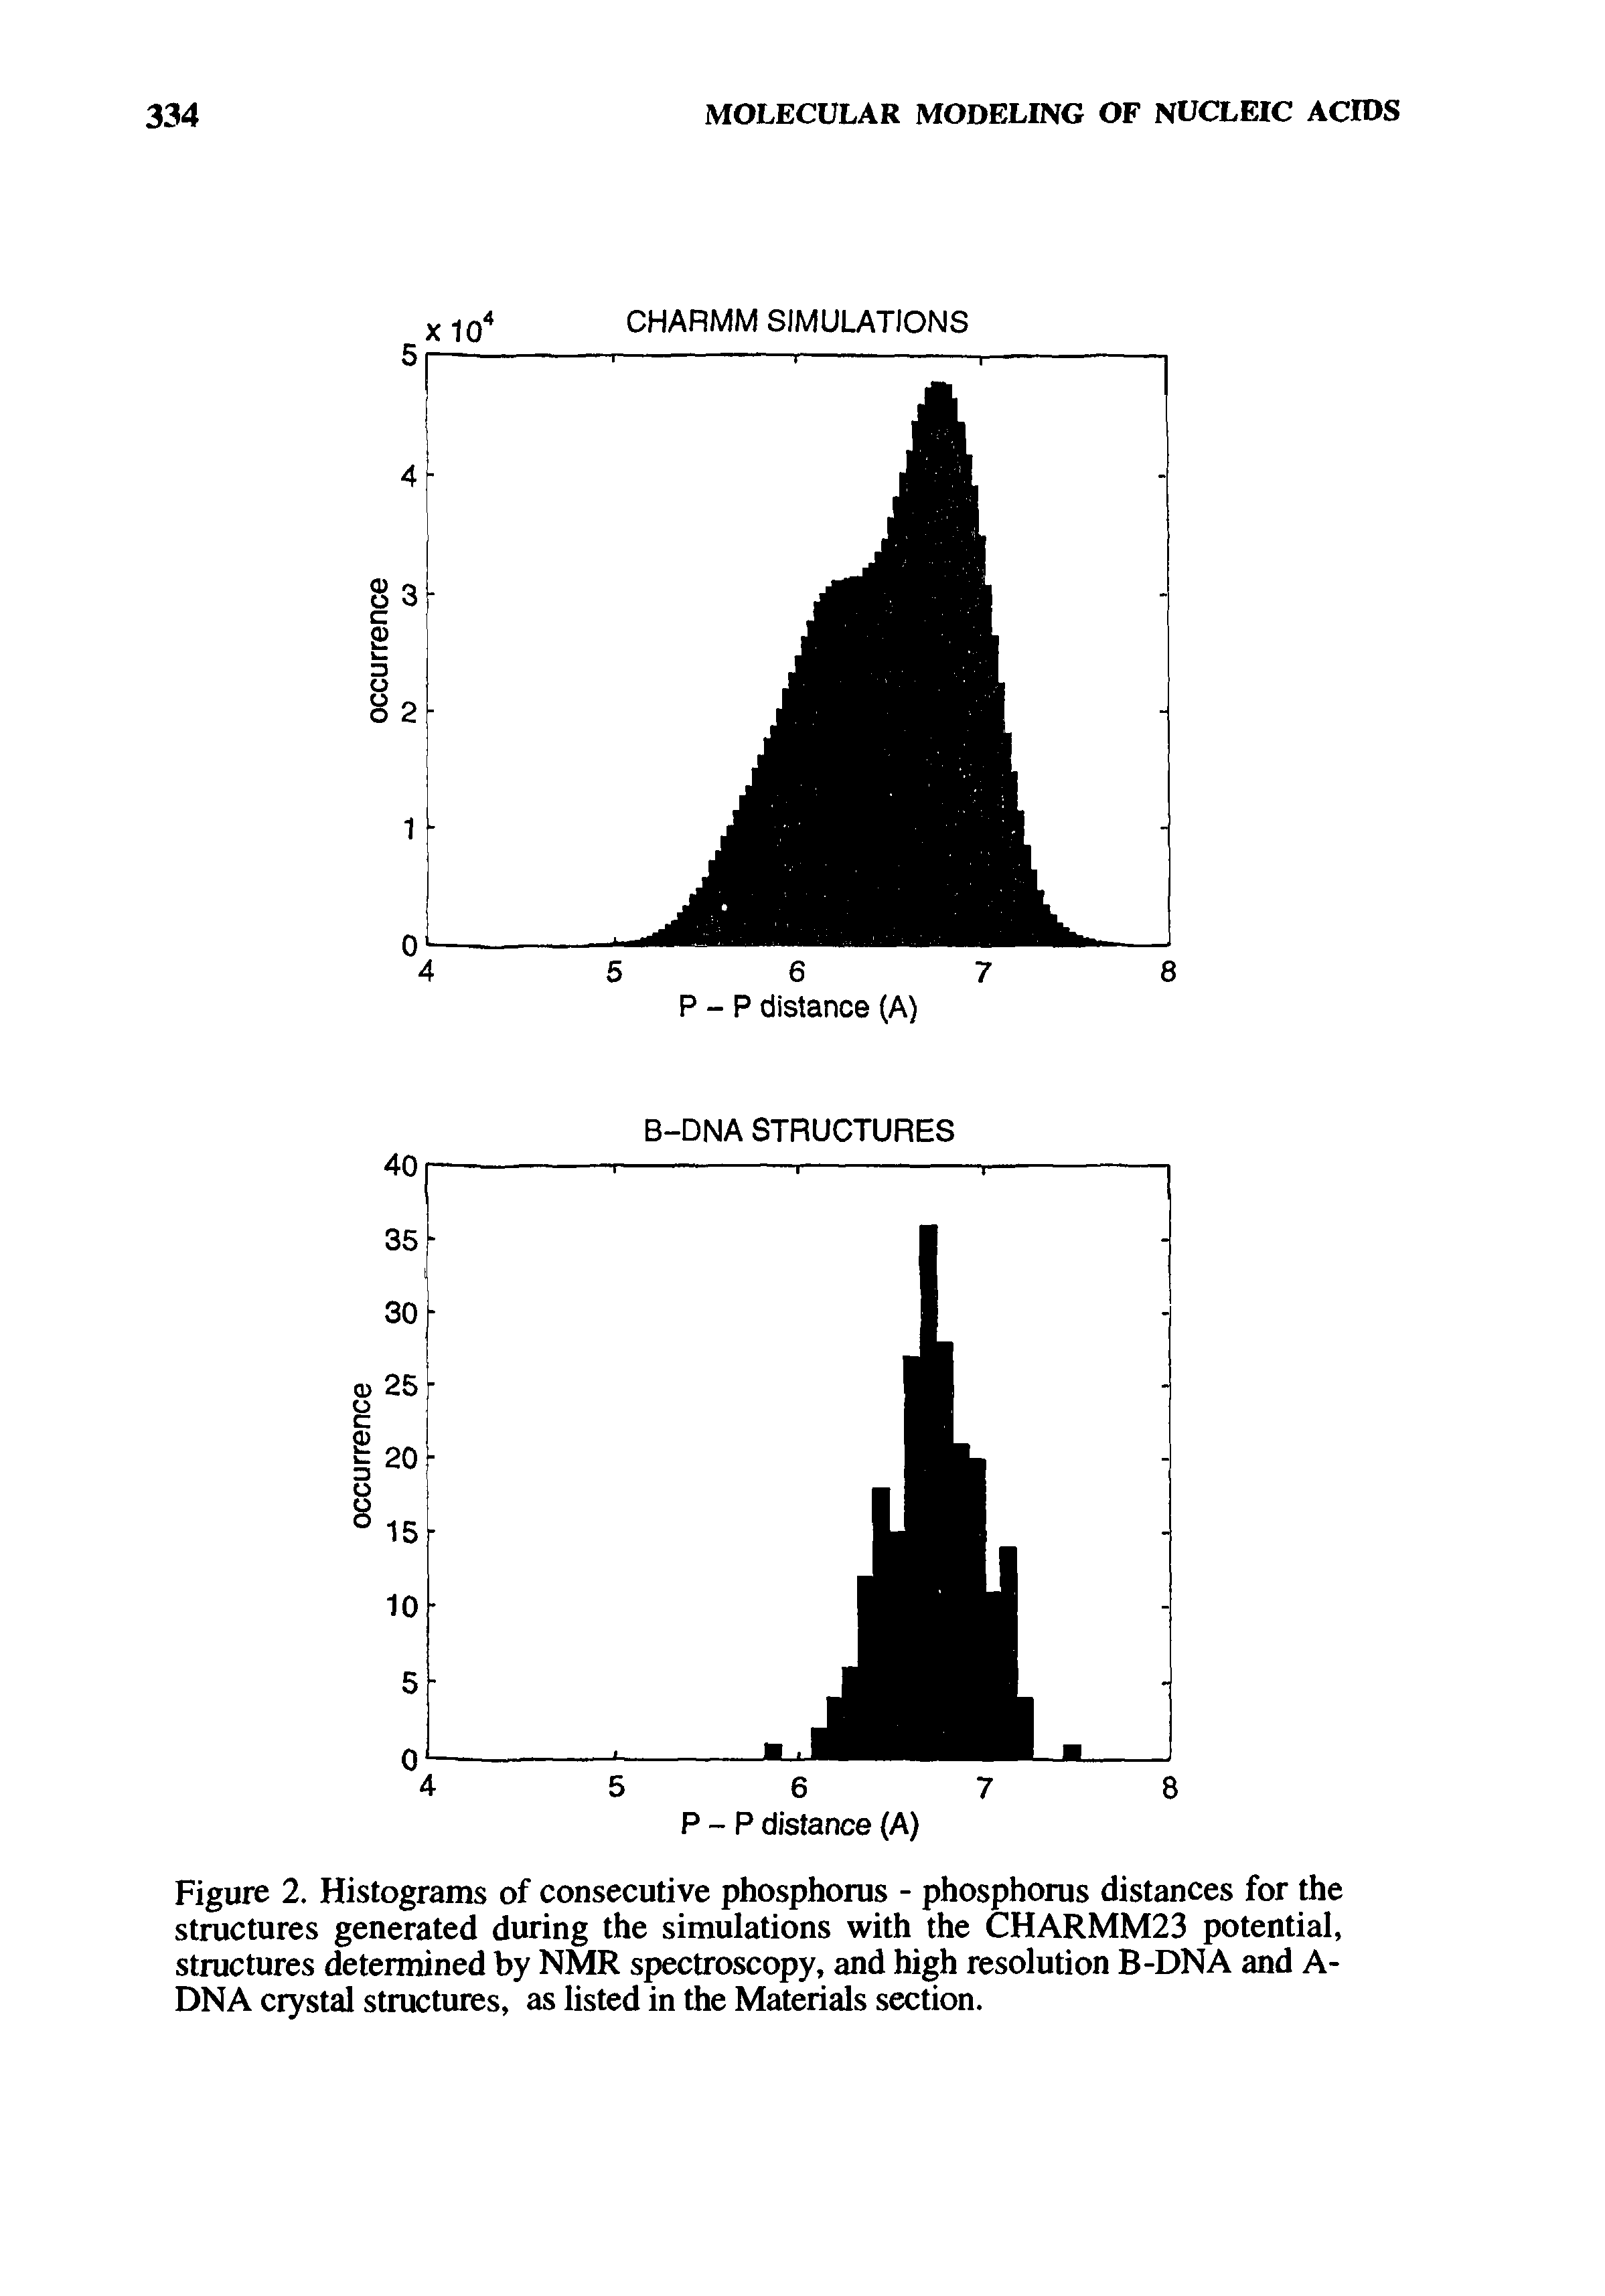 Figure 2. Histograms of consecutive phosphorus - phosphorus distances for the structures generated during the simulations with the CHARMM23 potential, structures determined by NMR spectroscopy, and high resolution B-DNA and A-DNA crystal structures, as listed in the Materials section.